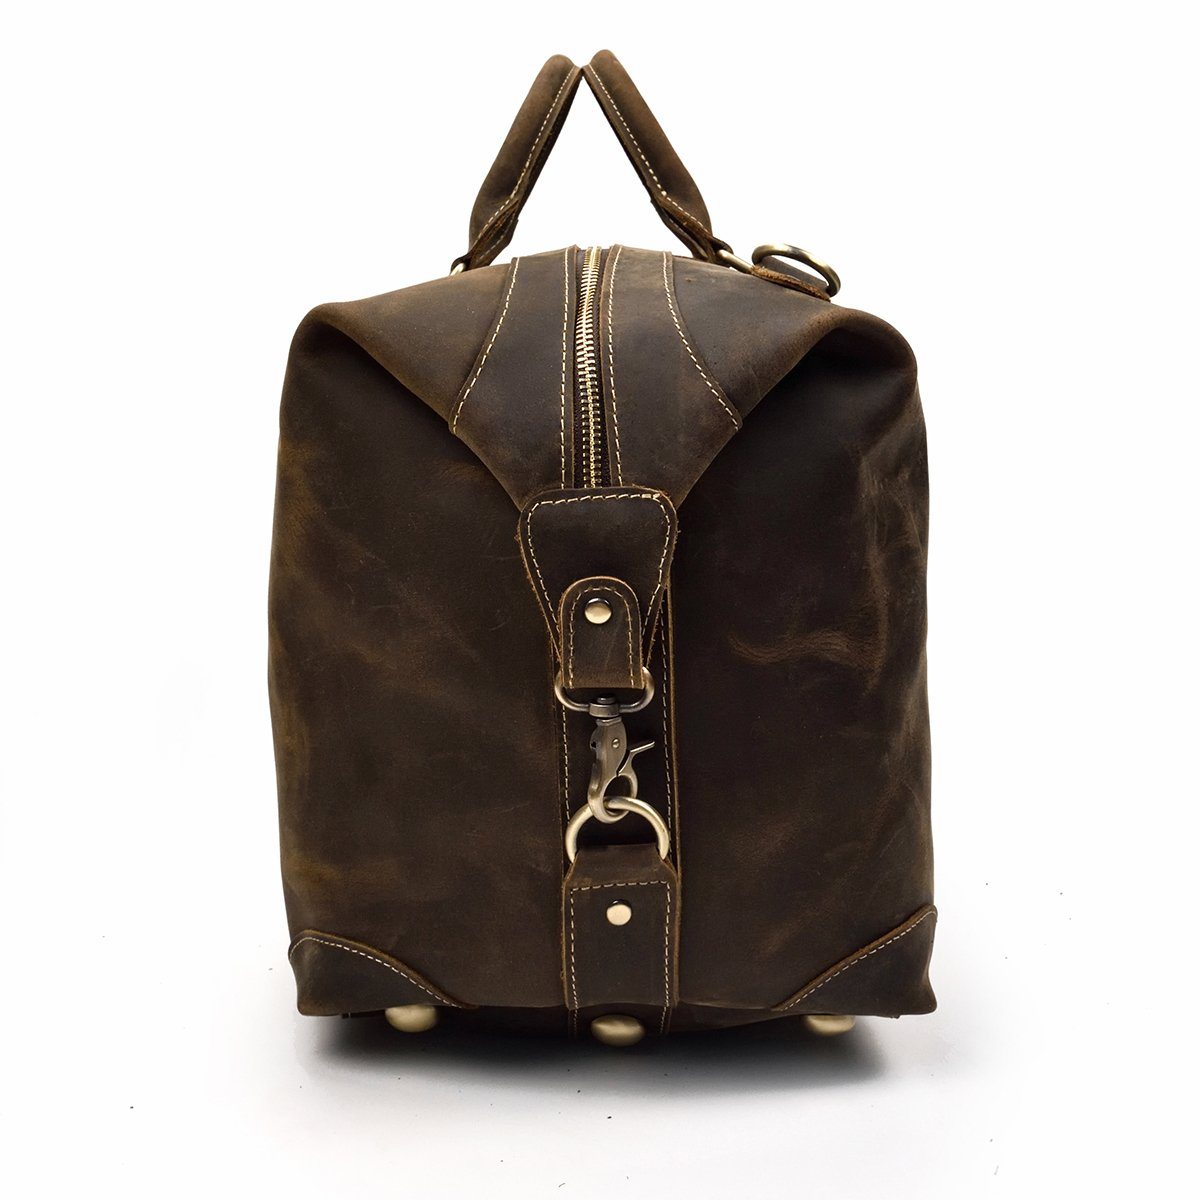 leather holdall overnight bag